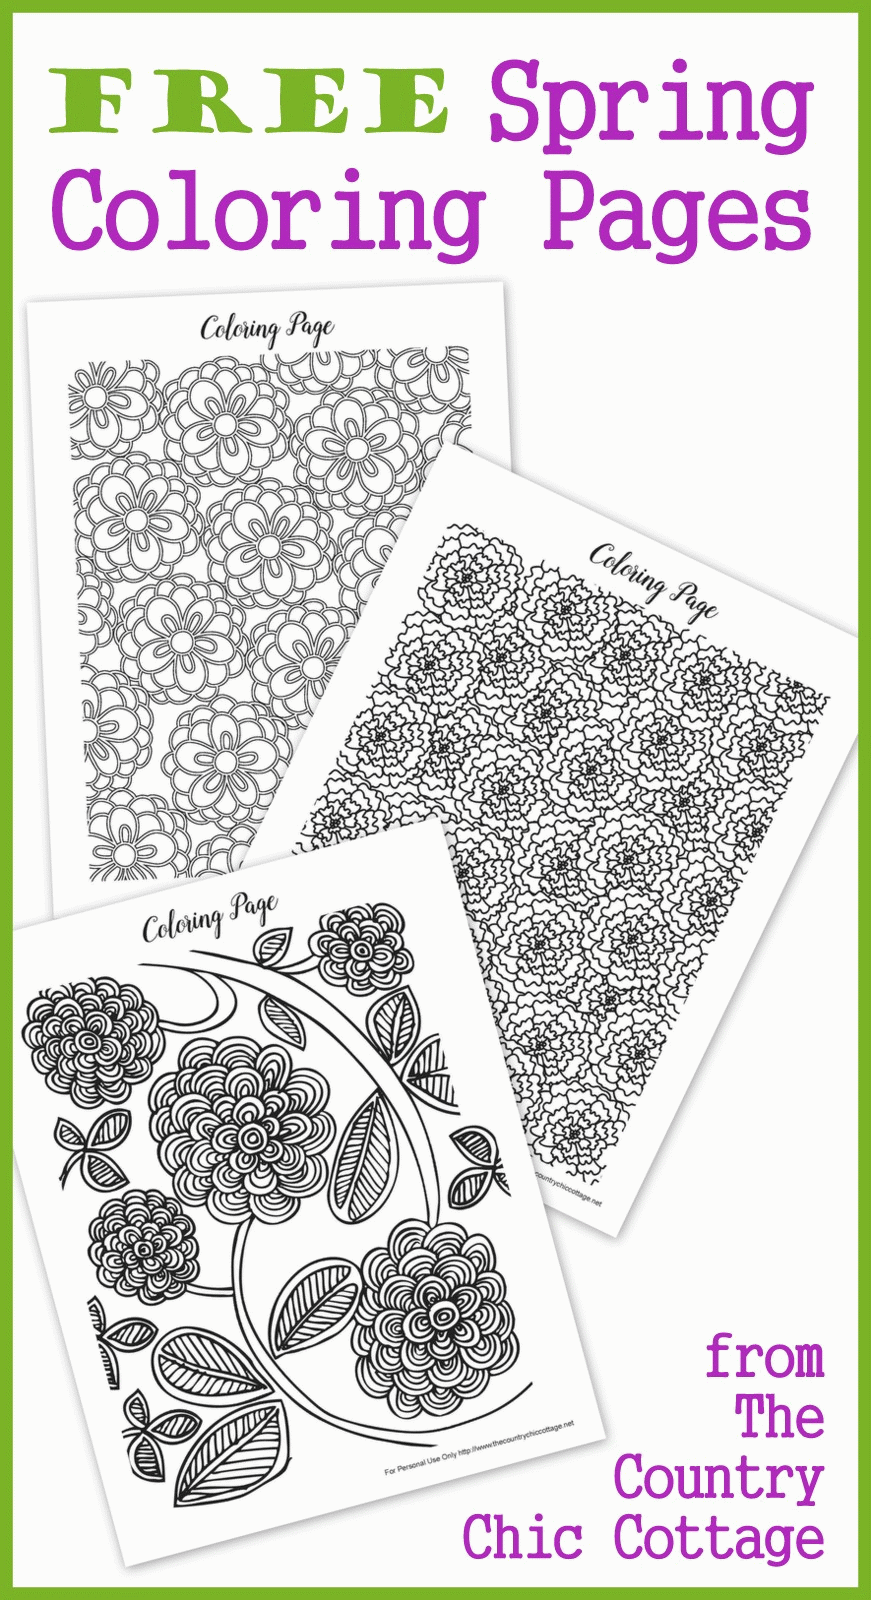 Free Spring Coloring Pages for Adults - The Country Chic Cottage